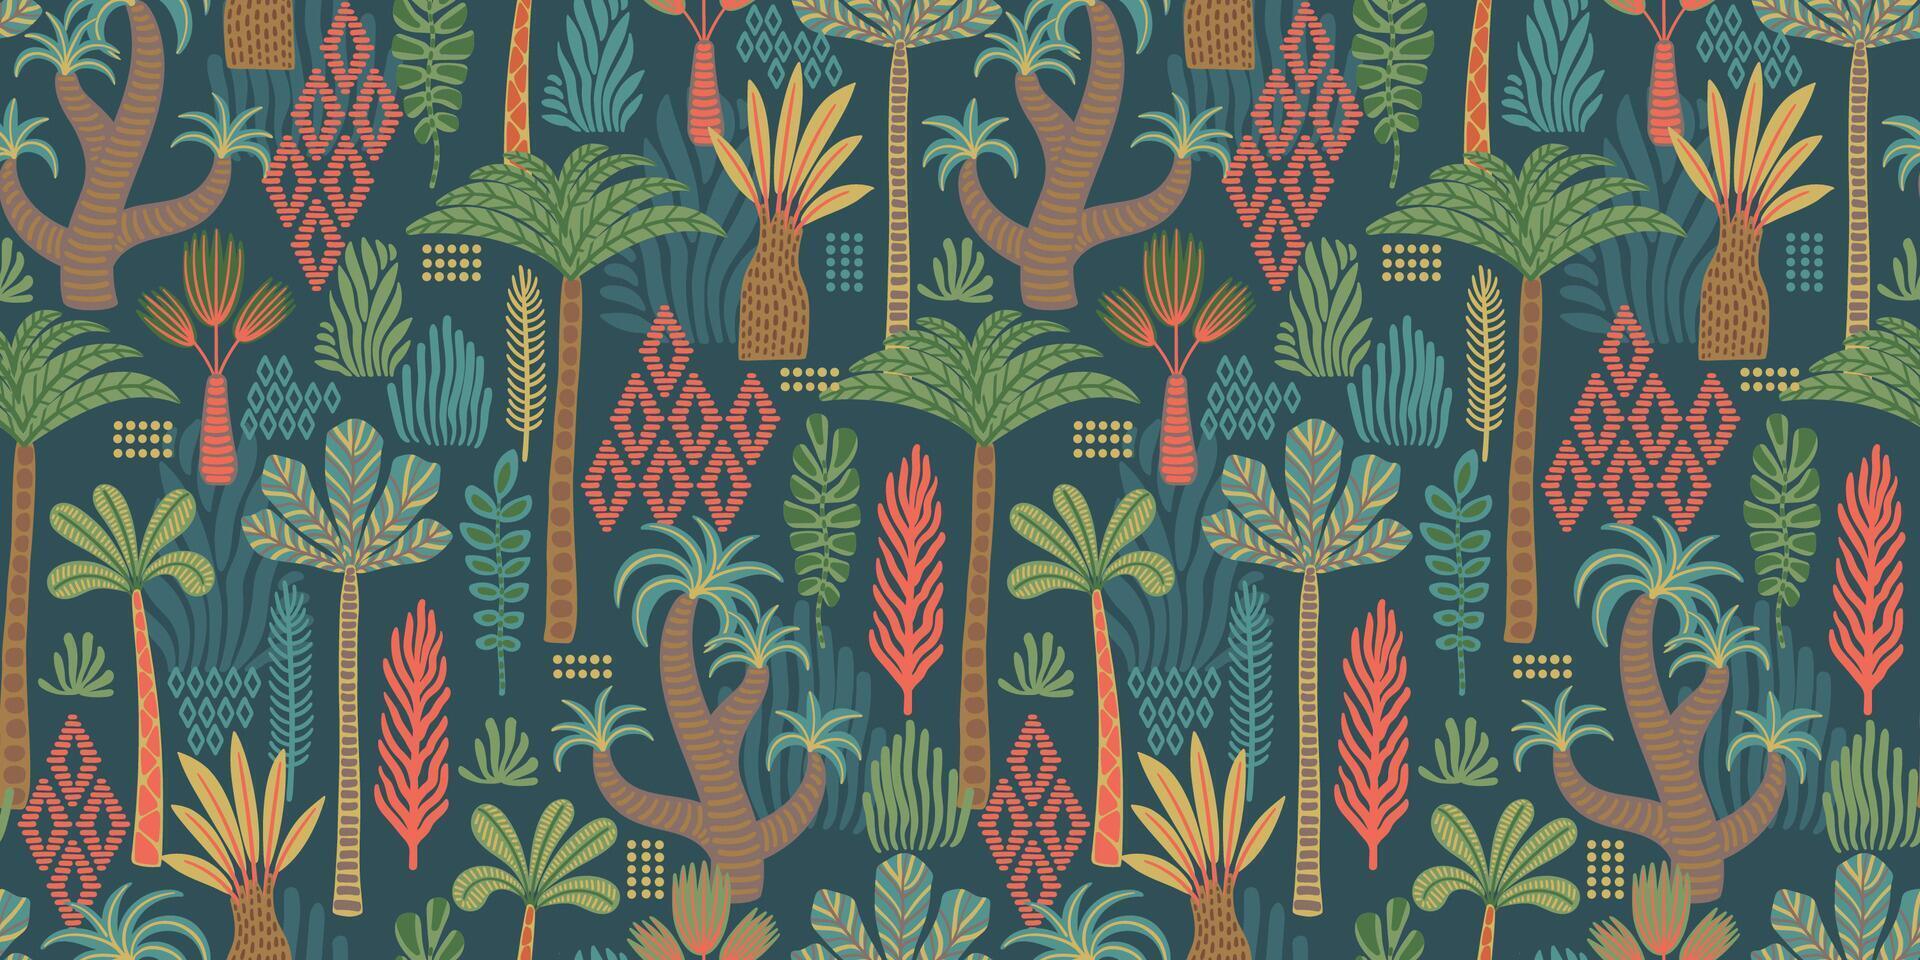 Ethnic tropical seamless pattern with palms. Modern abstract design for paper, cover, fabric, interior decor and other use vector